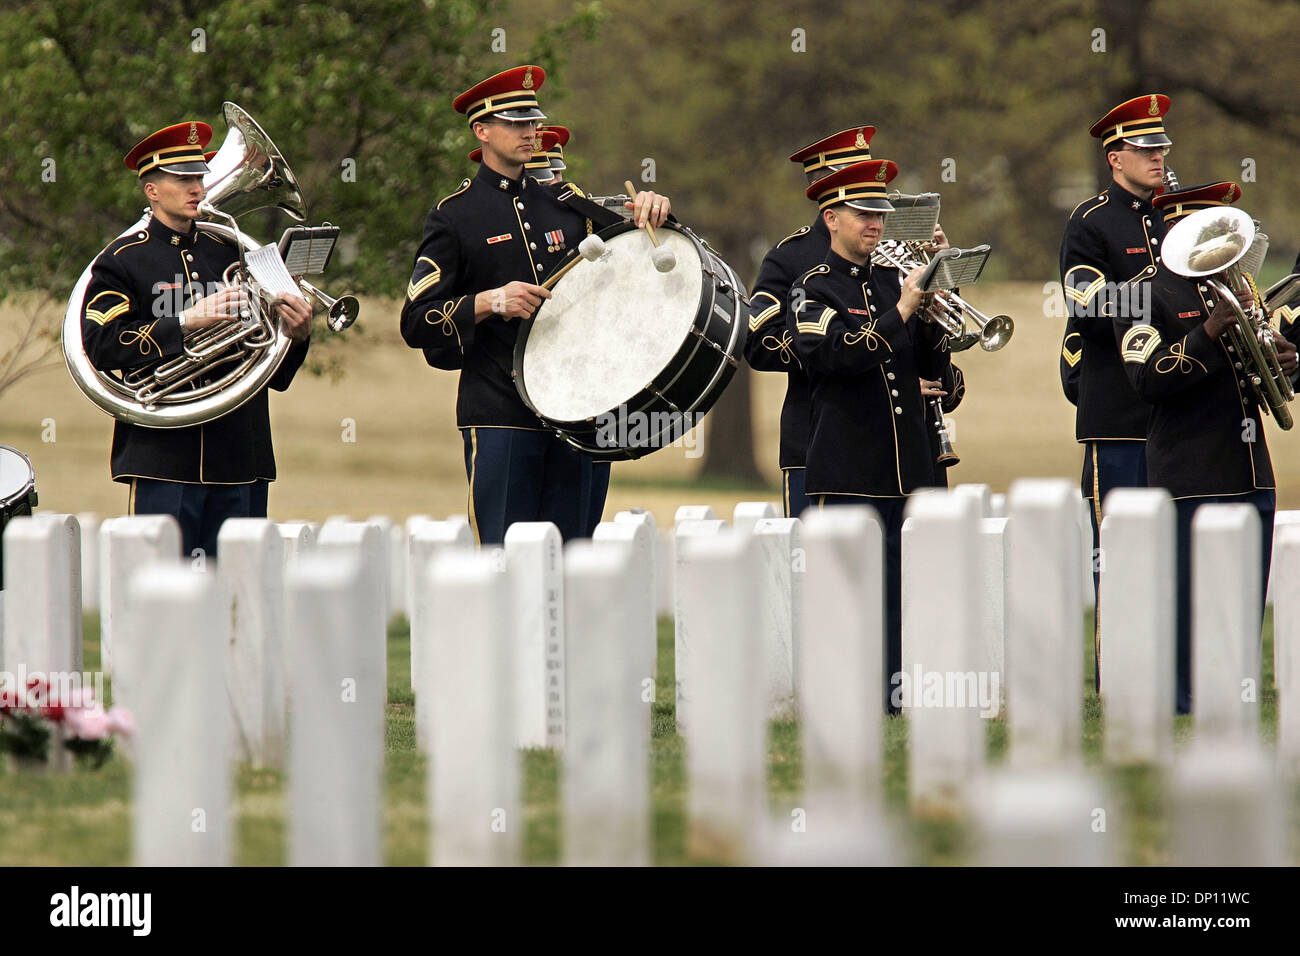 Apr 12, 2006; Washington, DC, USA; A full military band plays in Arlington National Cemetery, during the funeral for Sgt. William E. Dillender April 12, 2006. The Department of Defense POW/Missing Personnel Office announced on February 14, 2006, that the remains of Maj. Jack L. Barker, Waycross, Fa.; Capt. John F. Dugan, Roselle, N.J.; Sgt. William E. Dillender, Naples, Fla.; and P Stock Photo